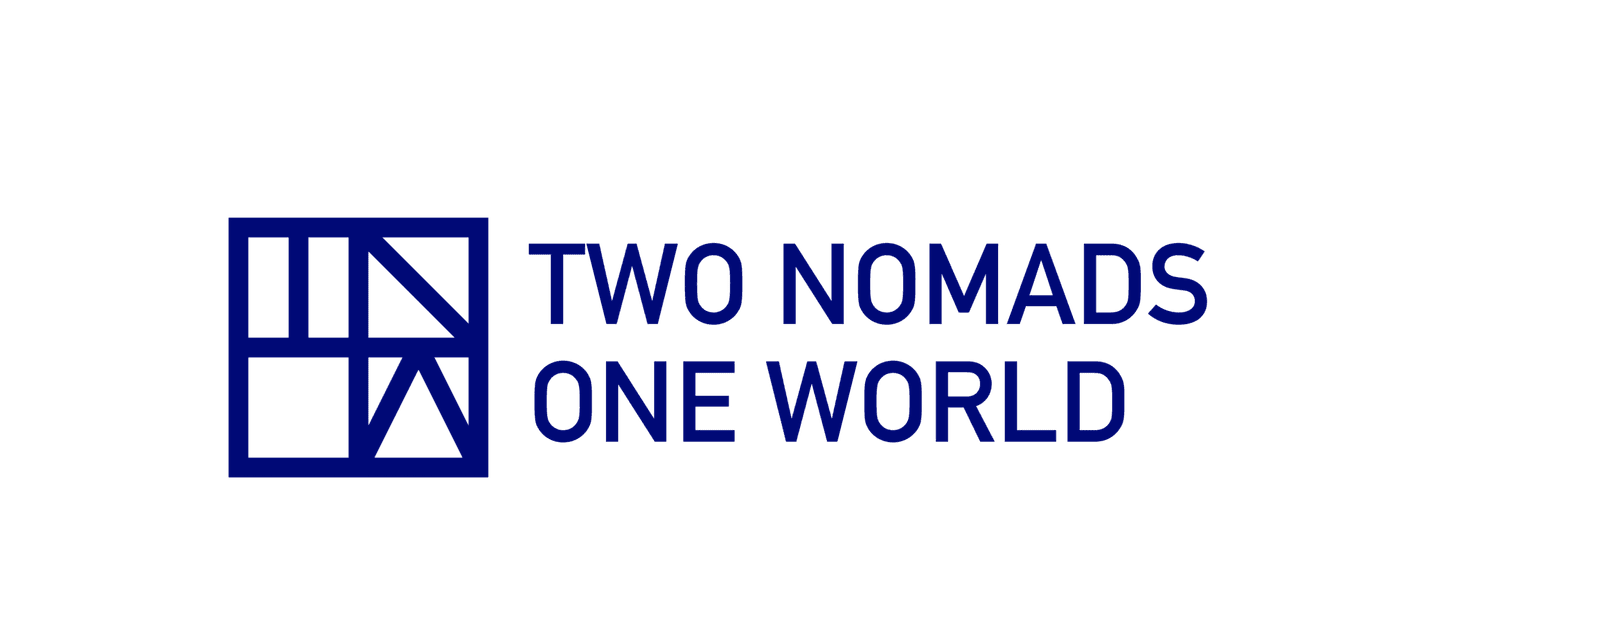 Two Nomads One World | Timor-Leste trips | Two Nomads One World